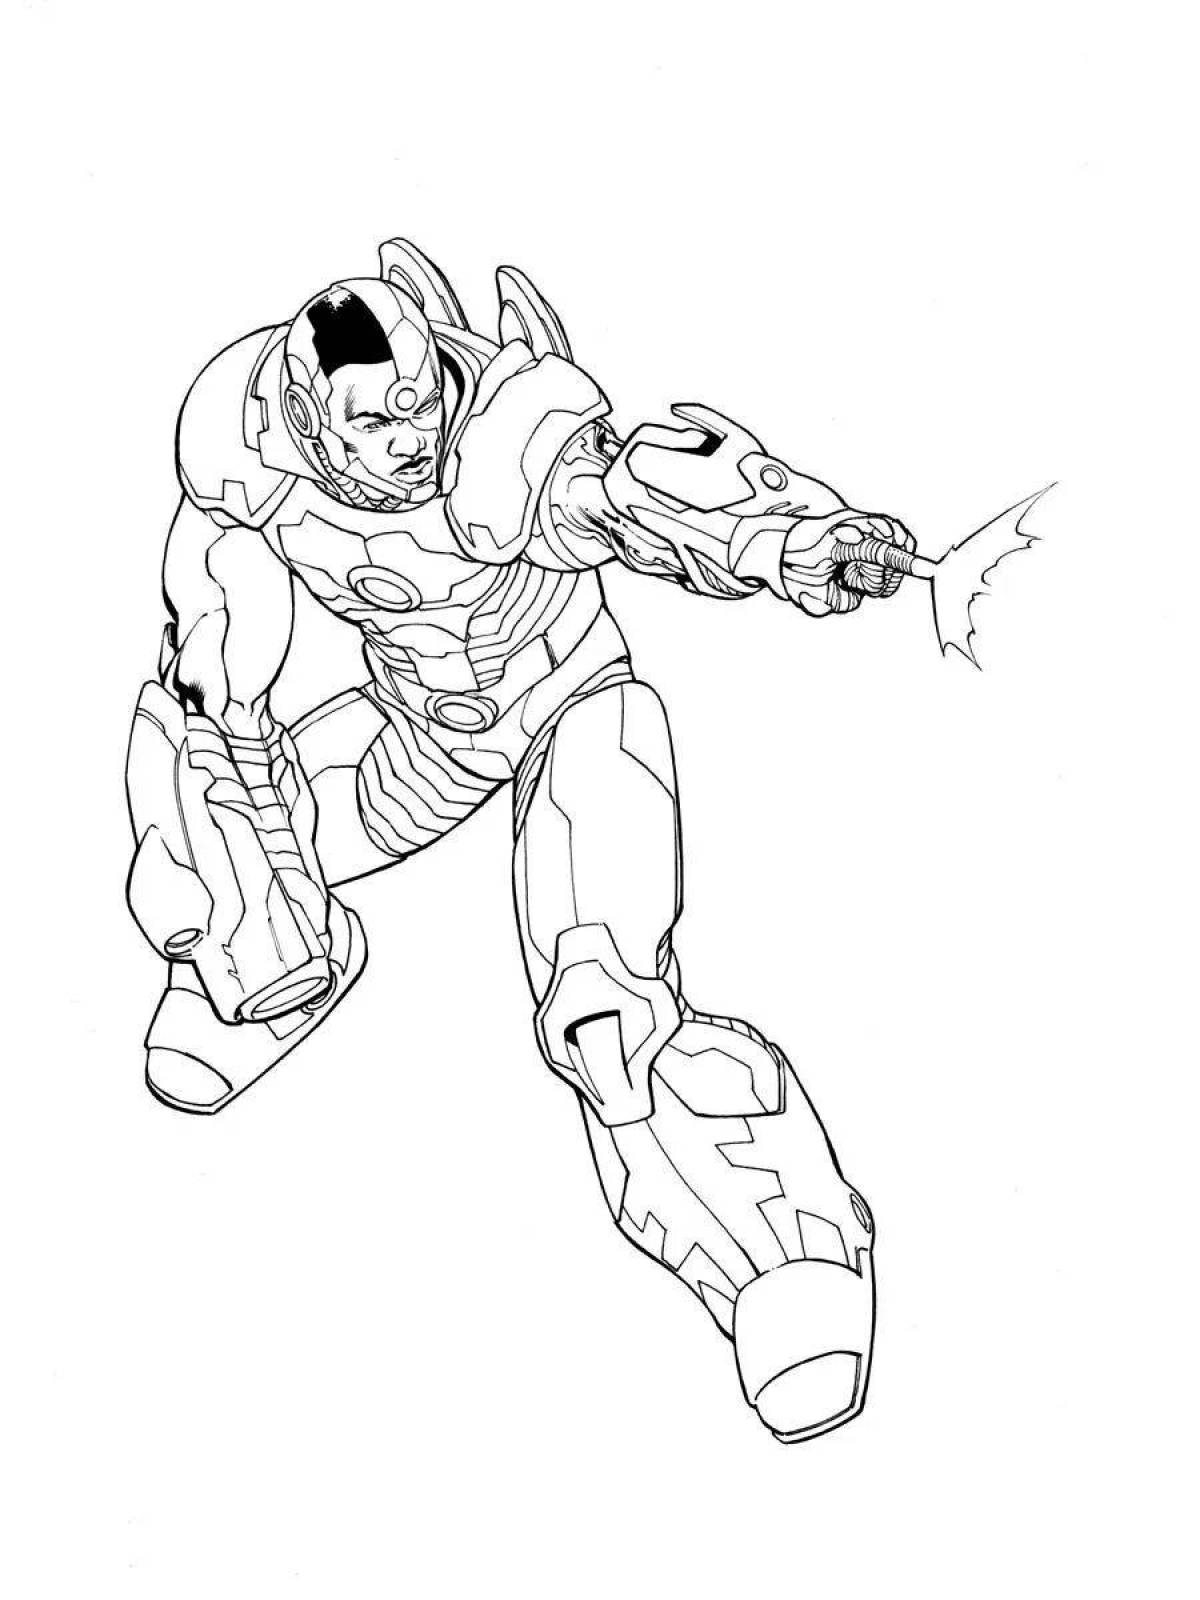 Colorful cyborg coloring page